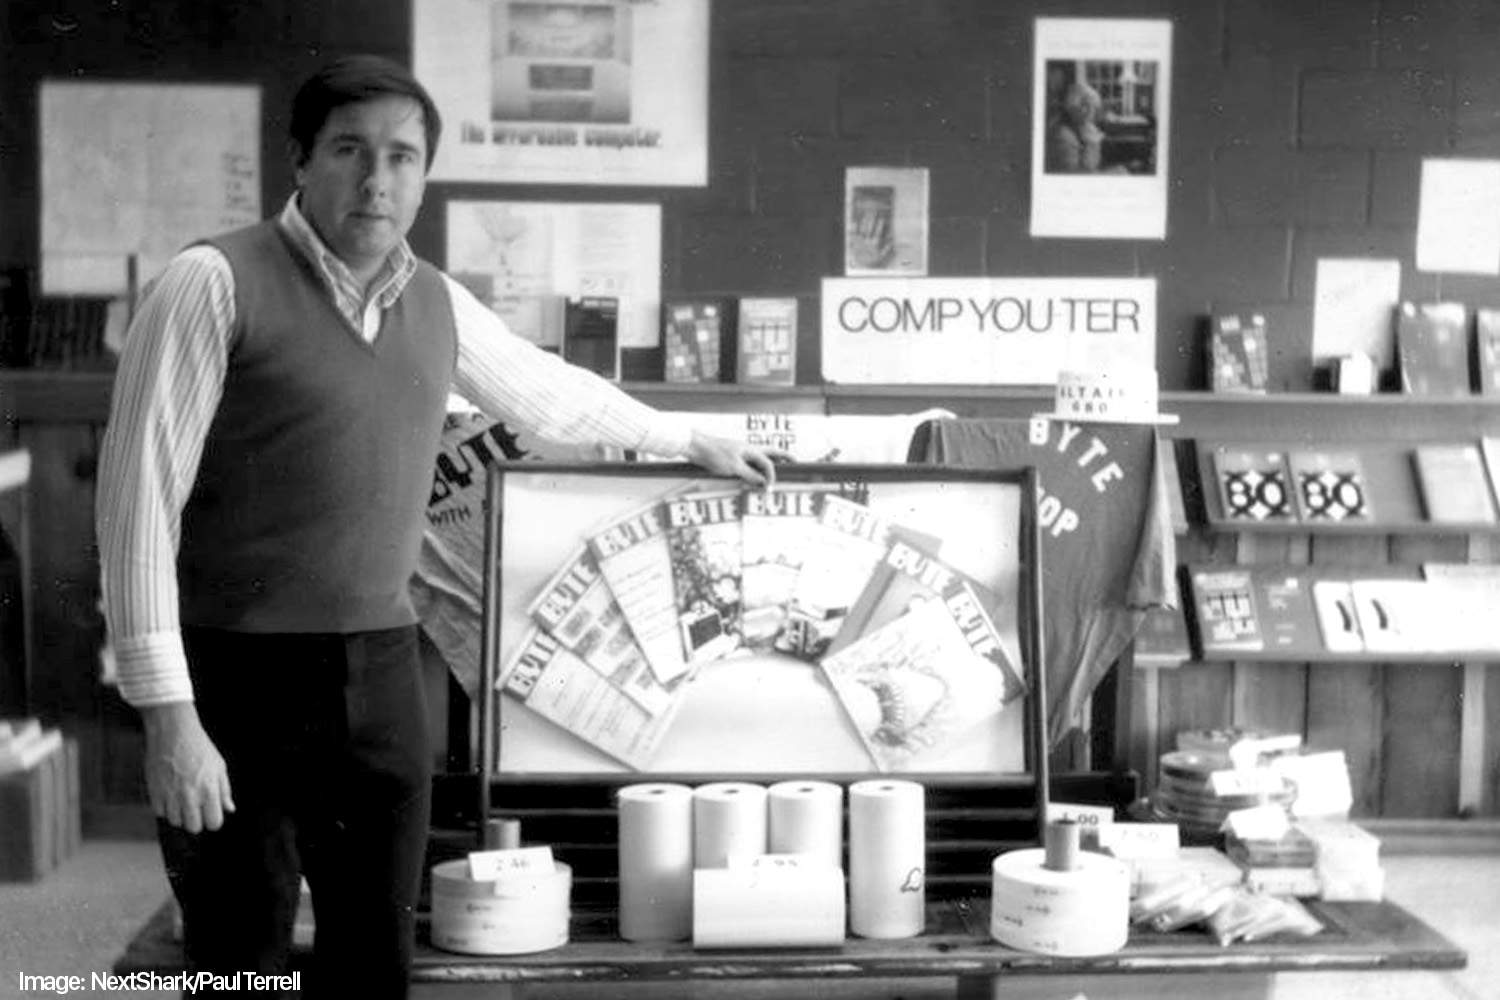 Paul Terrell founded The Byte Shop on his birthday.